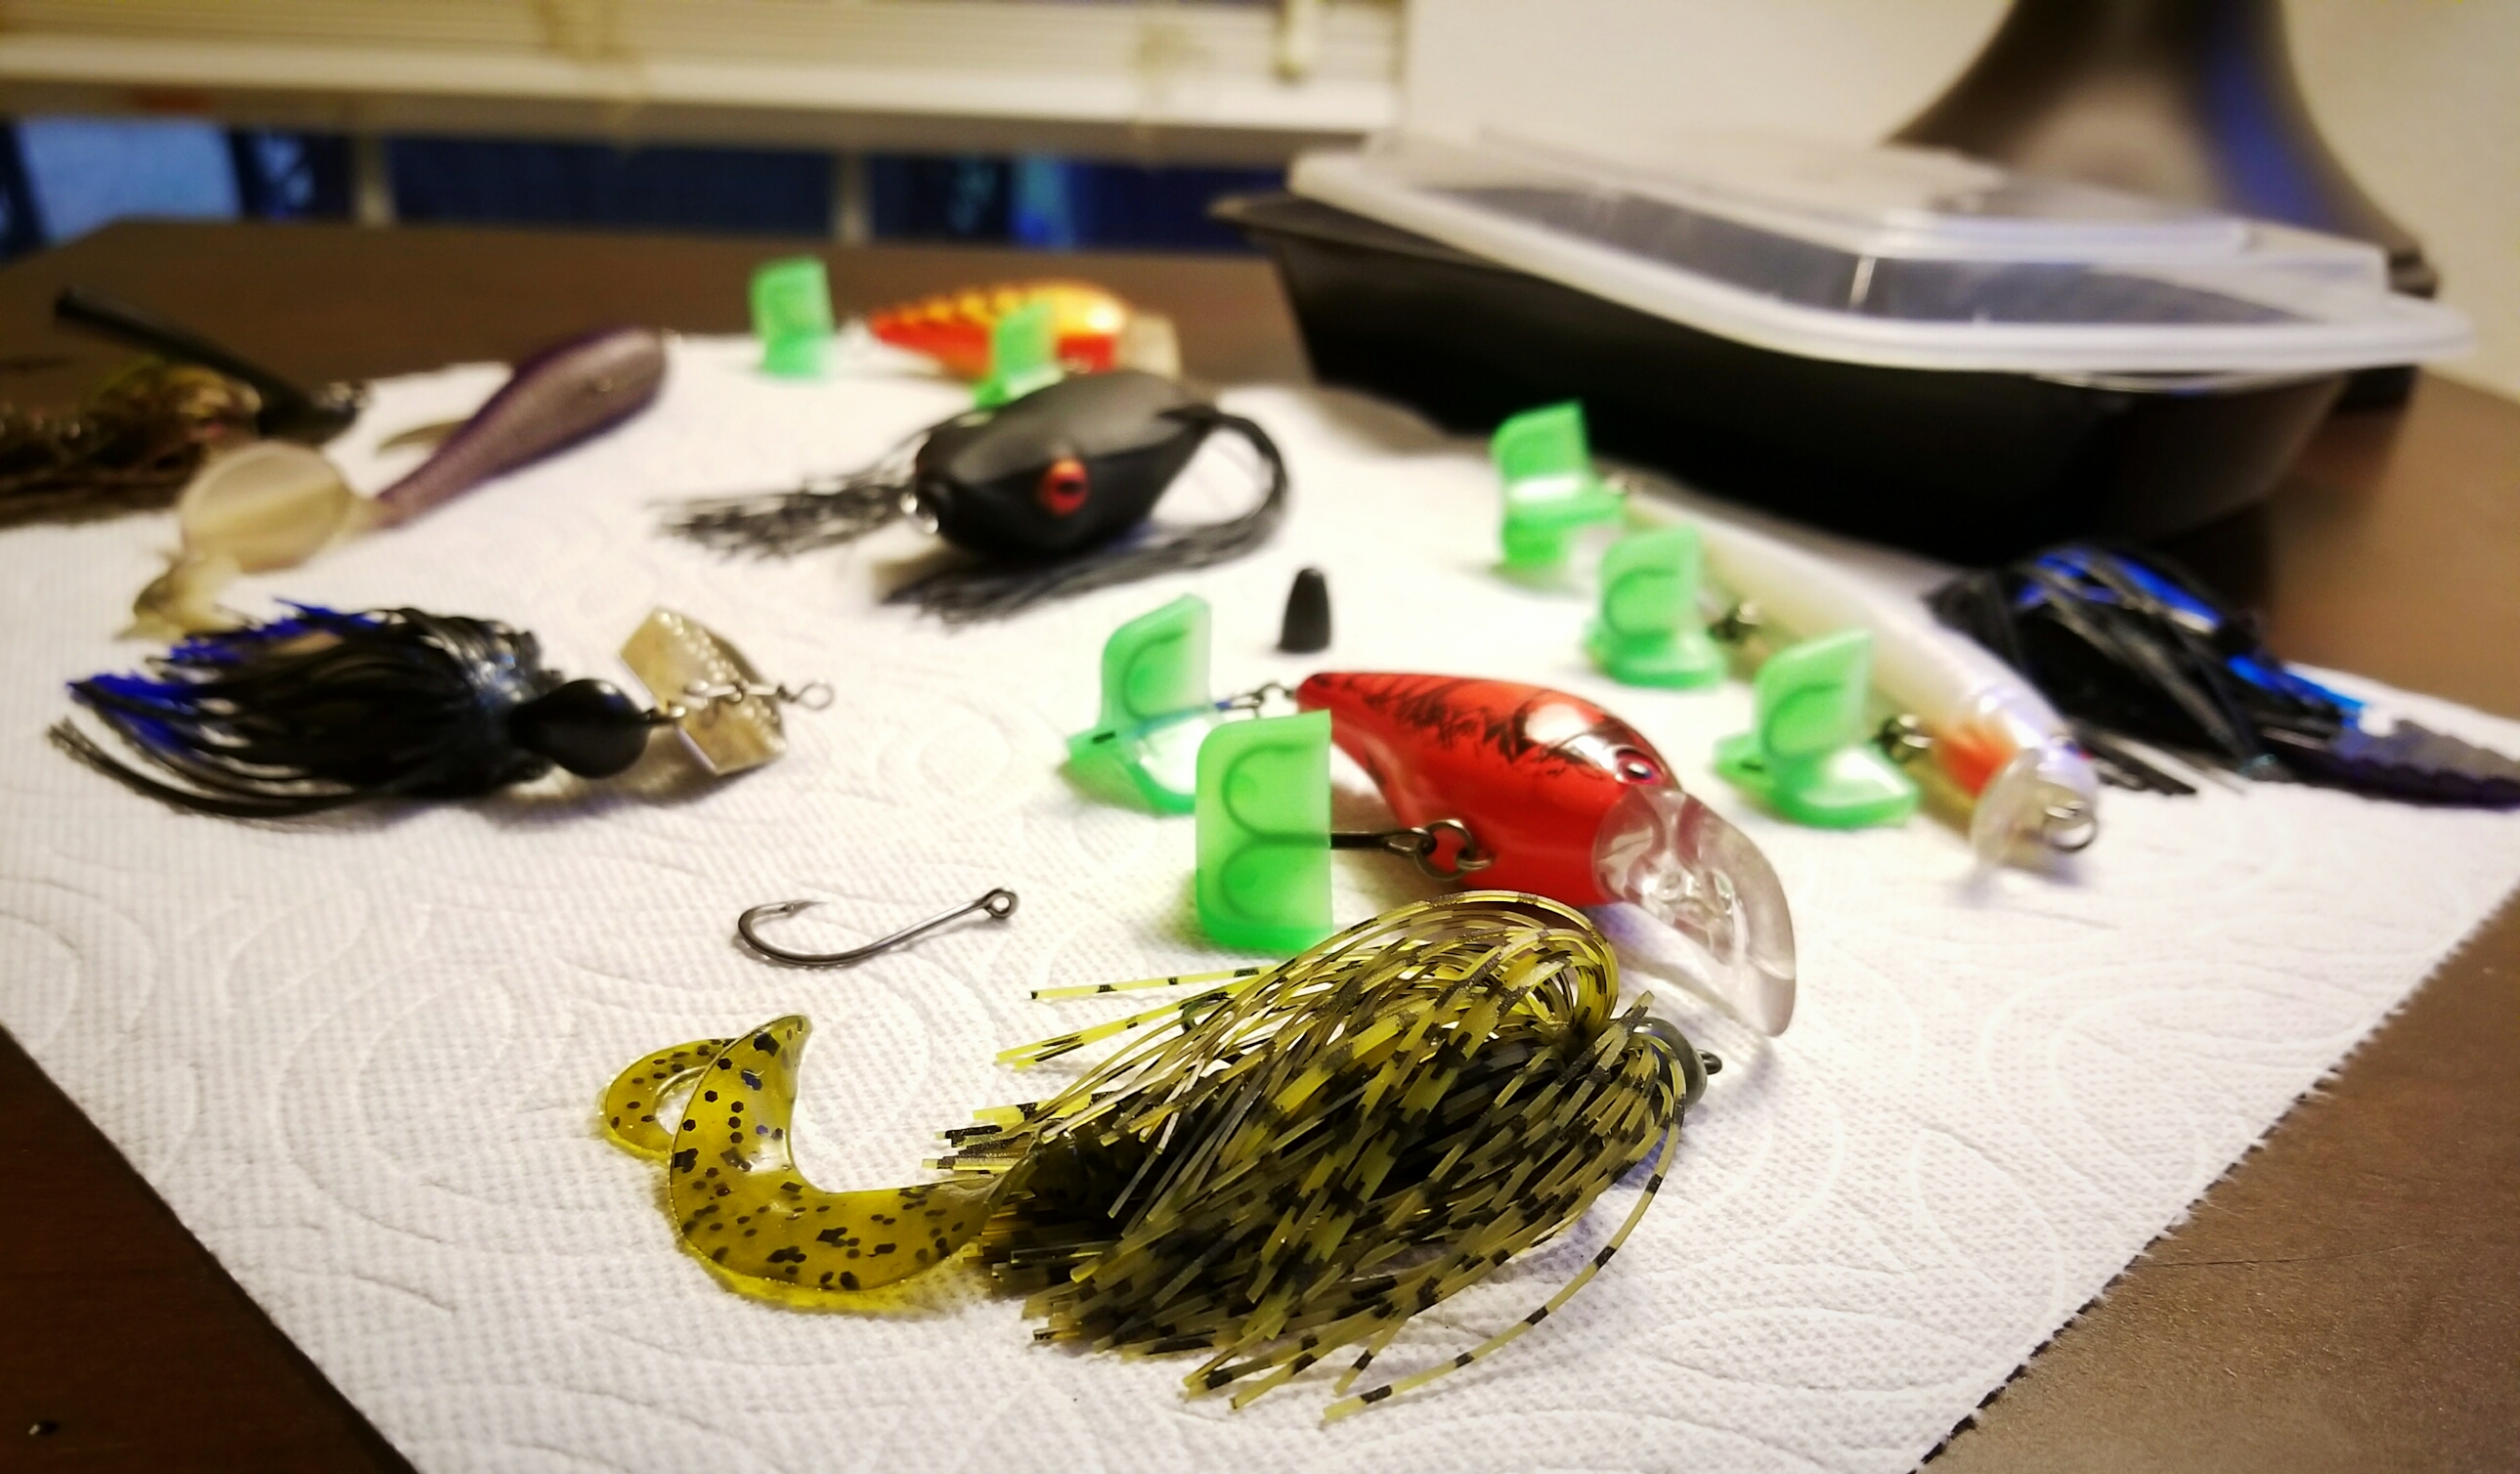 Various types of fishing lures drying on a paper towel